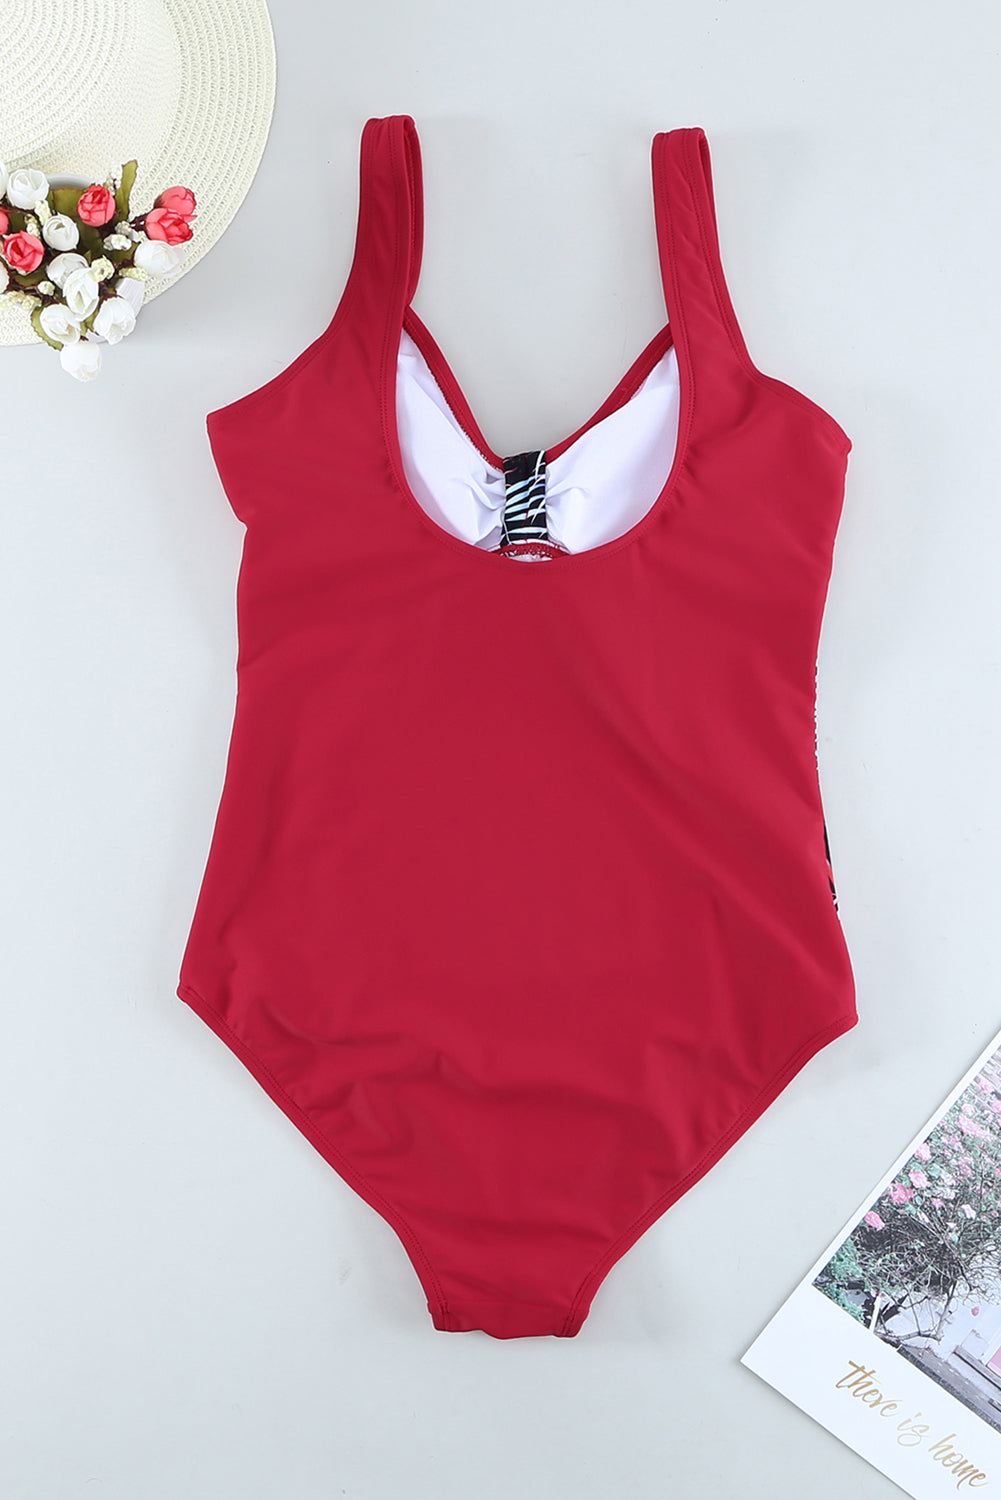 Red open back one piece swimsuit